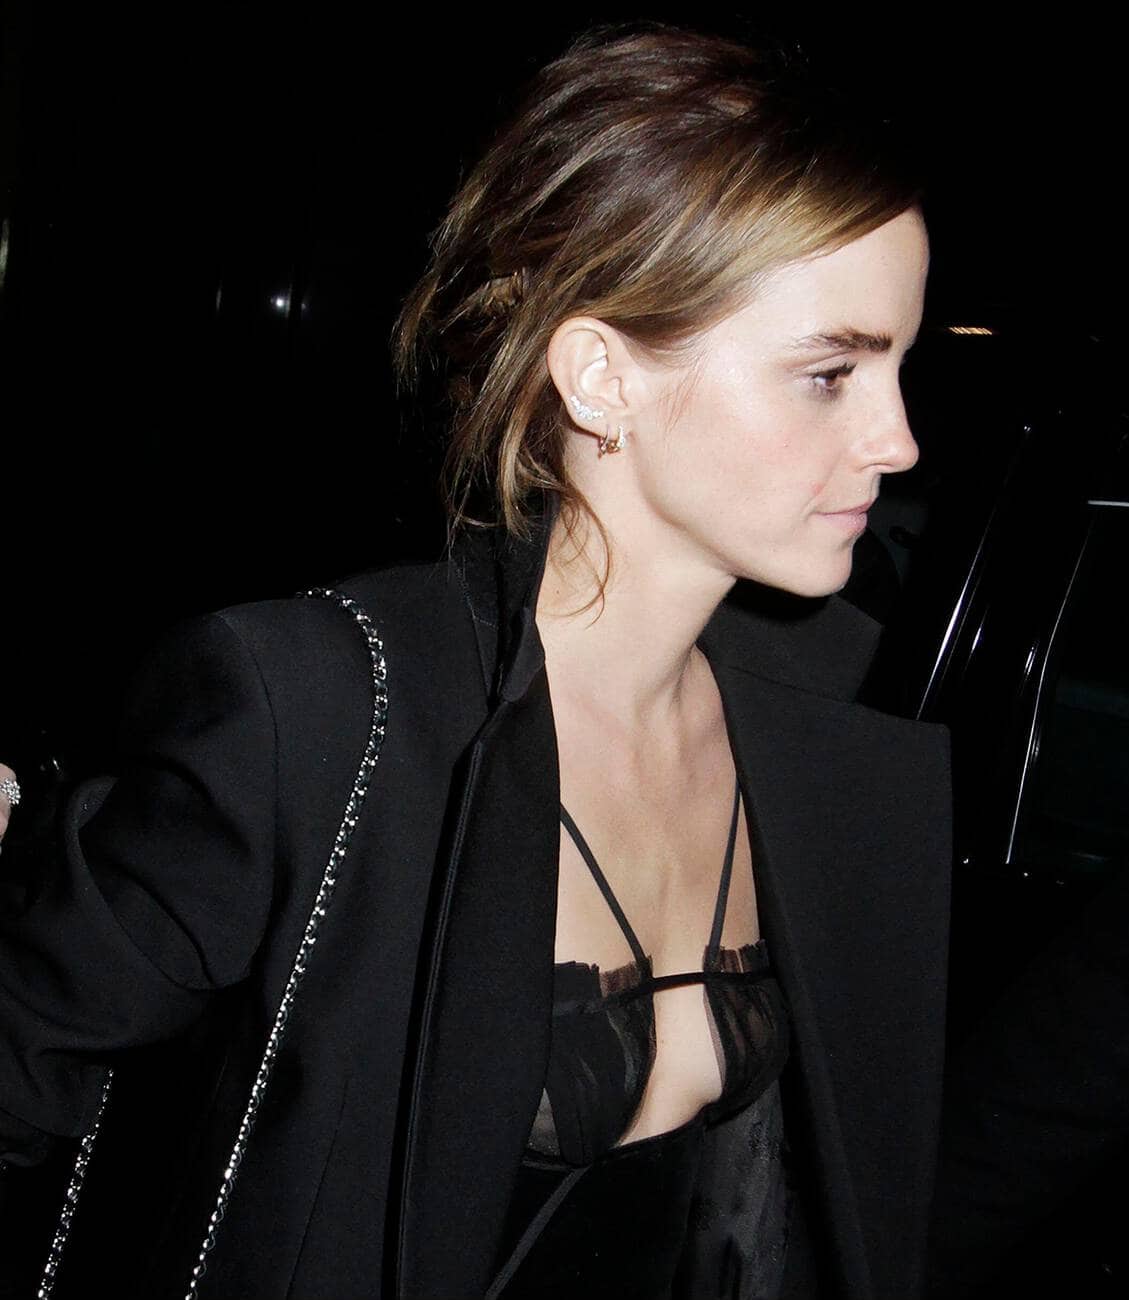 Emma Watson is Spotted in Car Wearing a Provocative Outfit for BAFTA Dinner